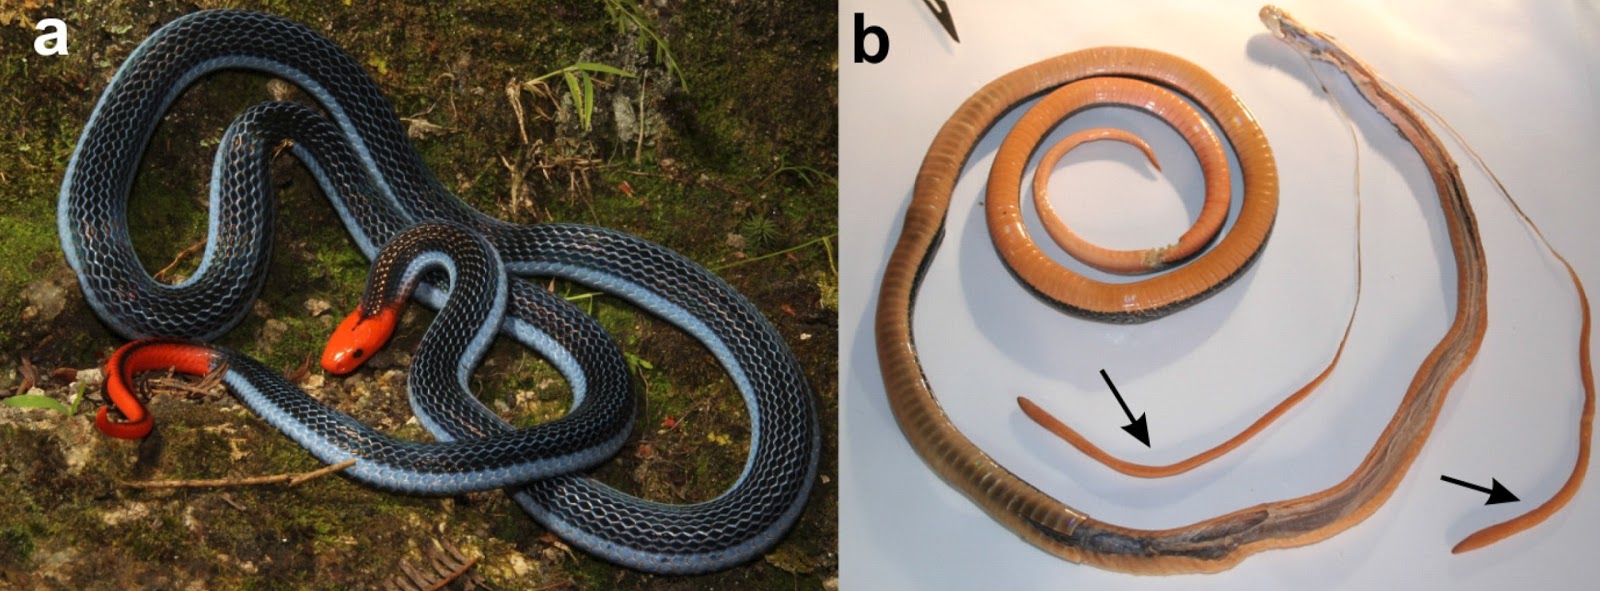 Serpent Research: A new toxin from the Blue Coral Snake